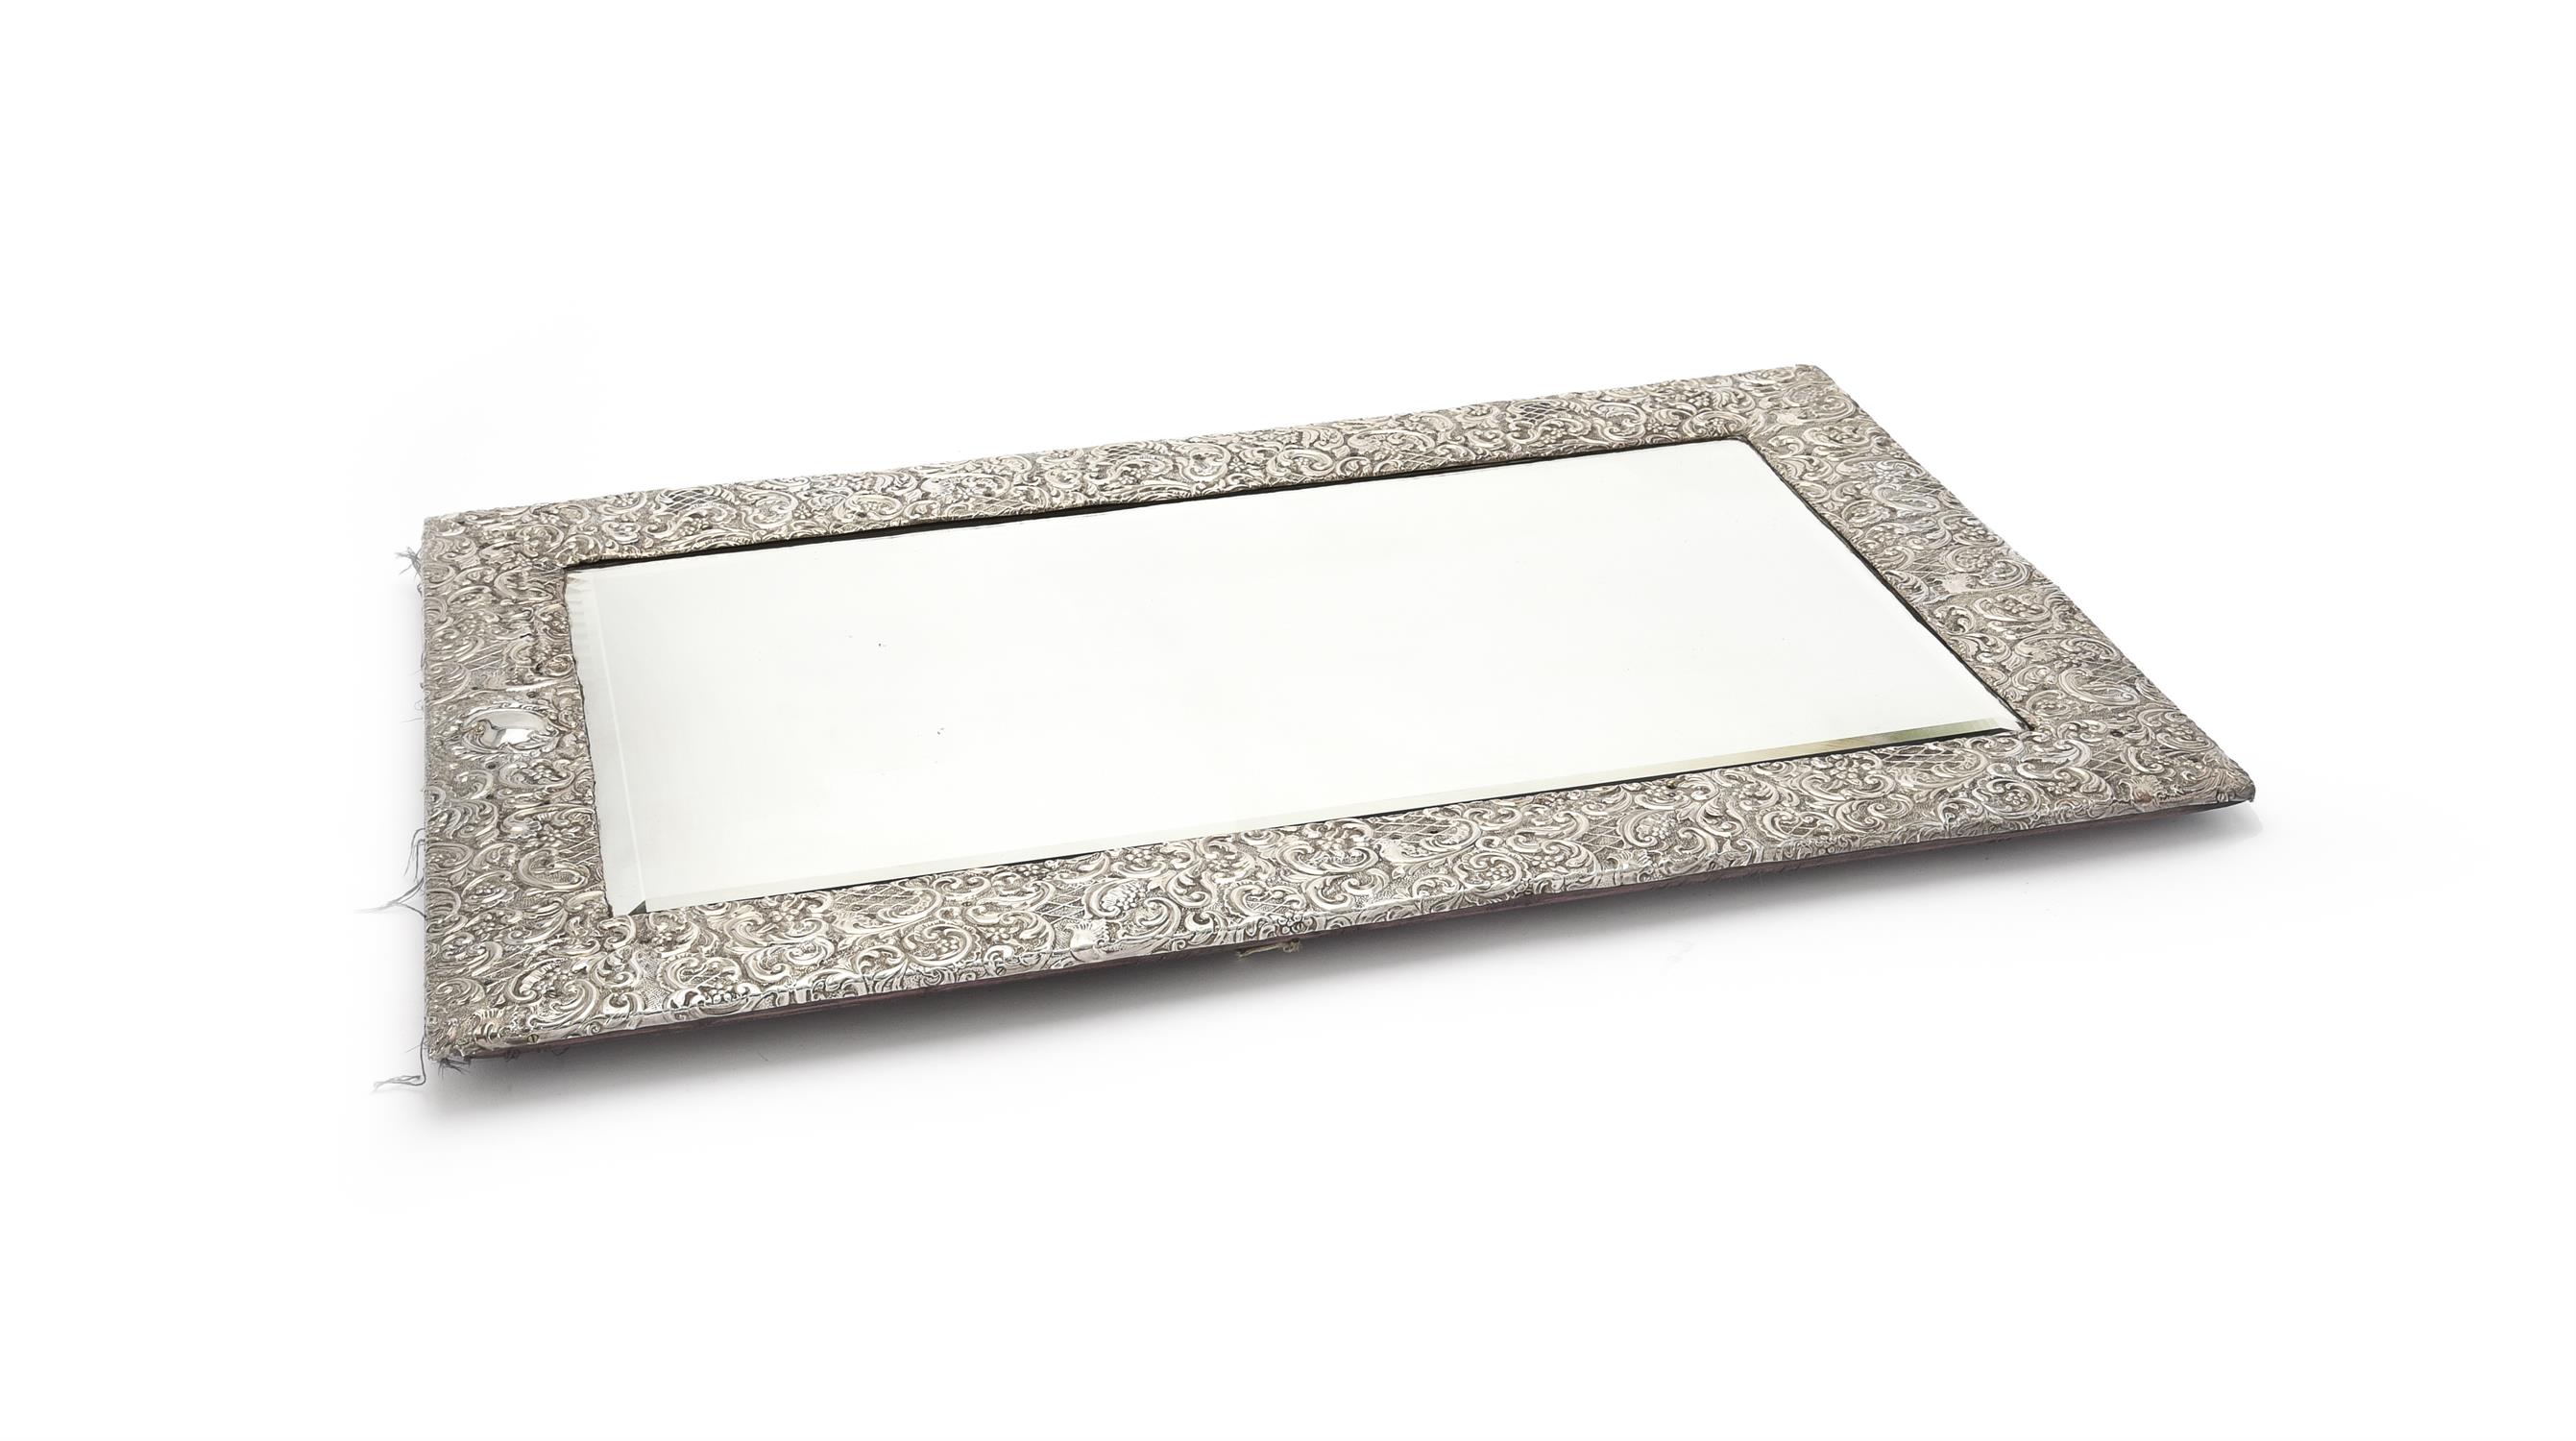 An Edwardian silver large rectangular wall or easel dressing mirror by A. & J. Zimmerman - Image 2 of 3